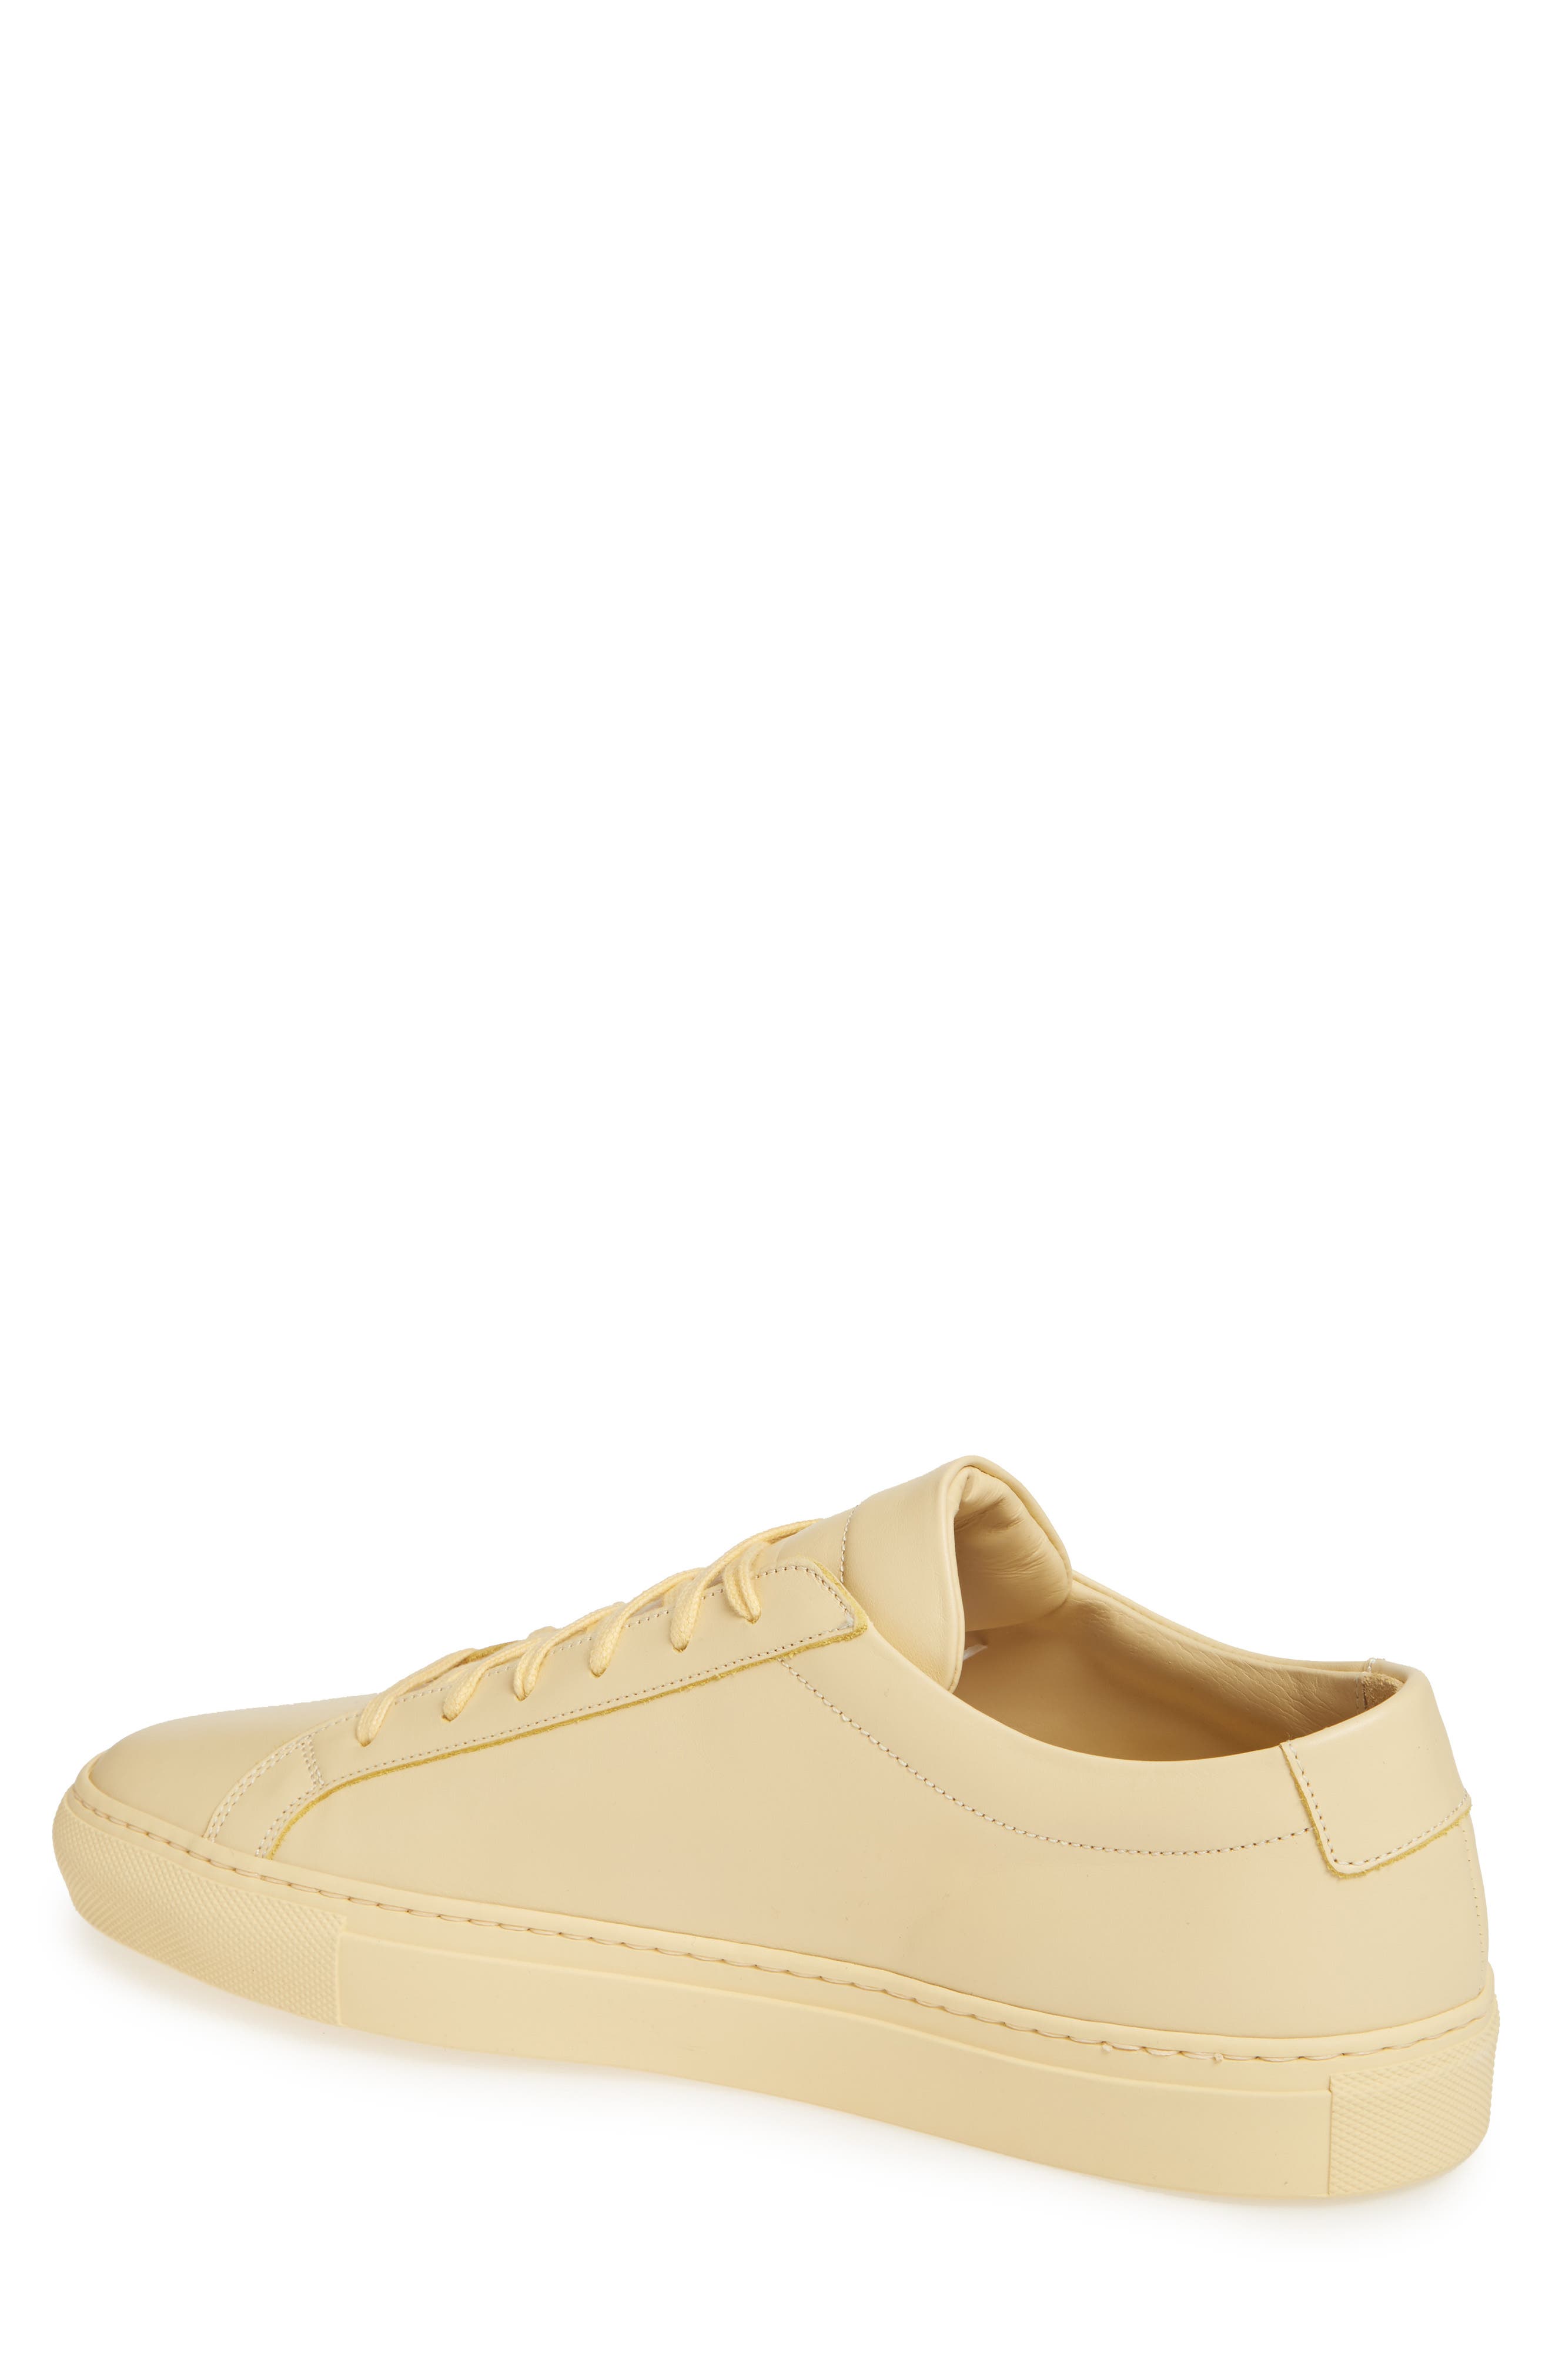 nordstrom rack common projects